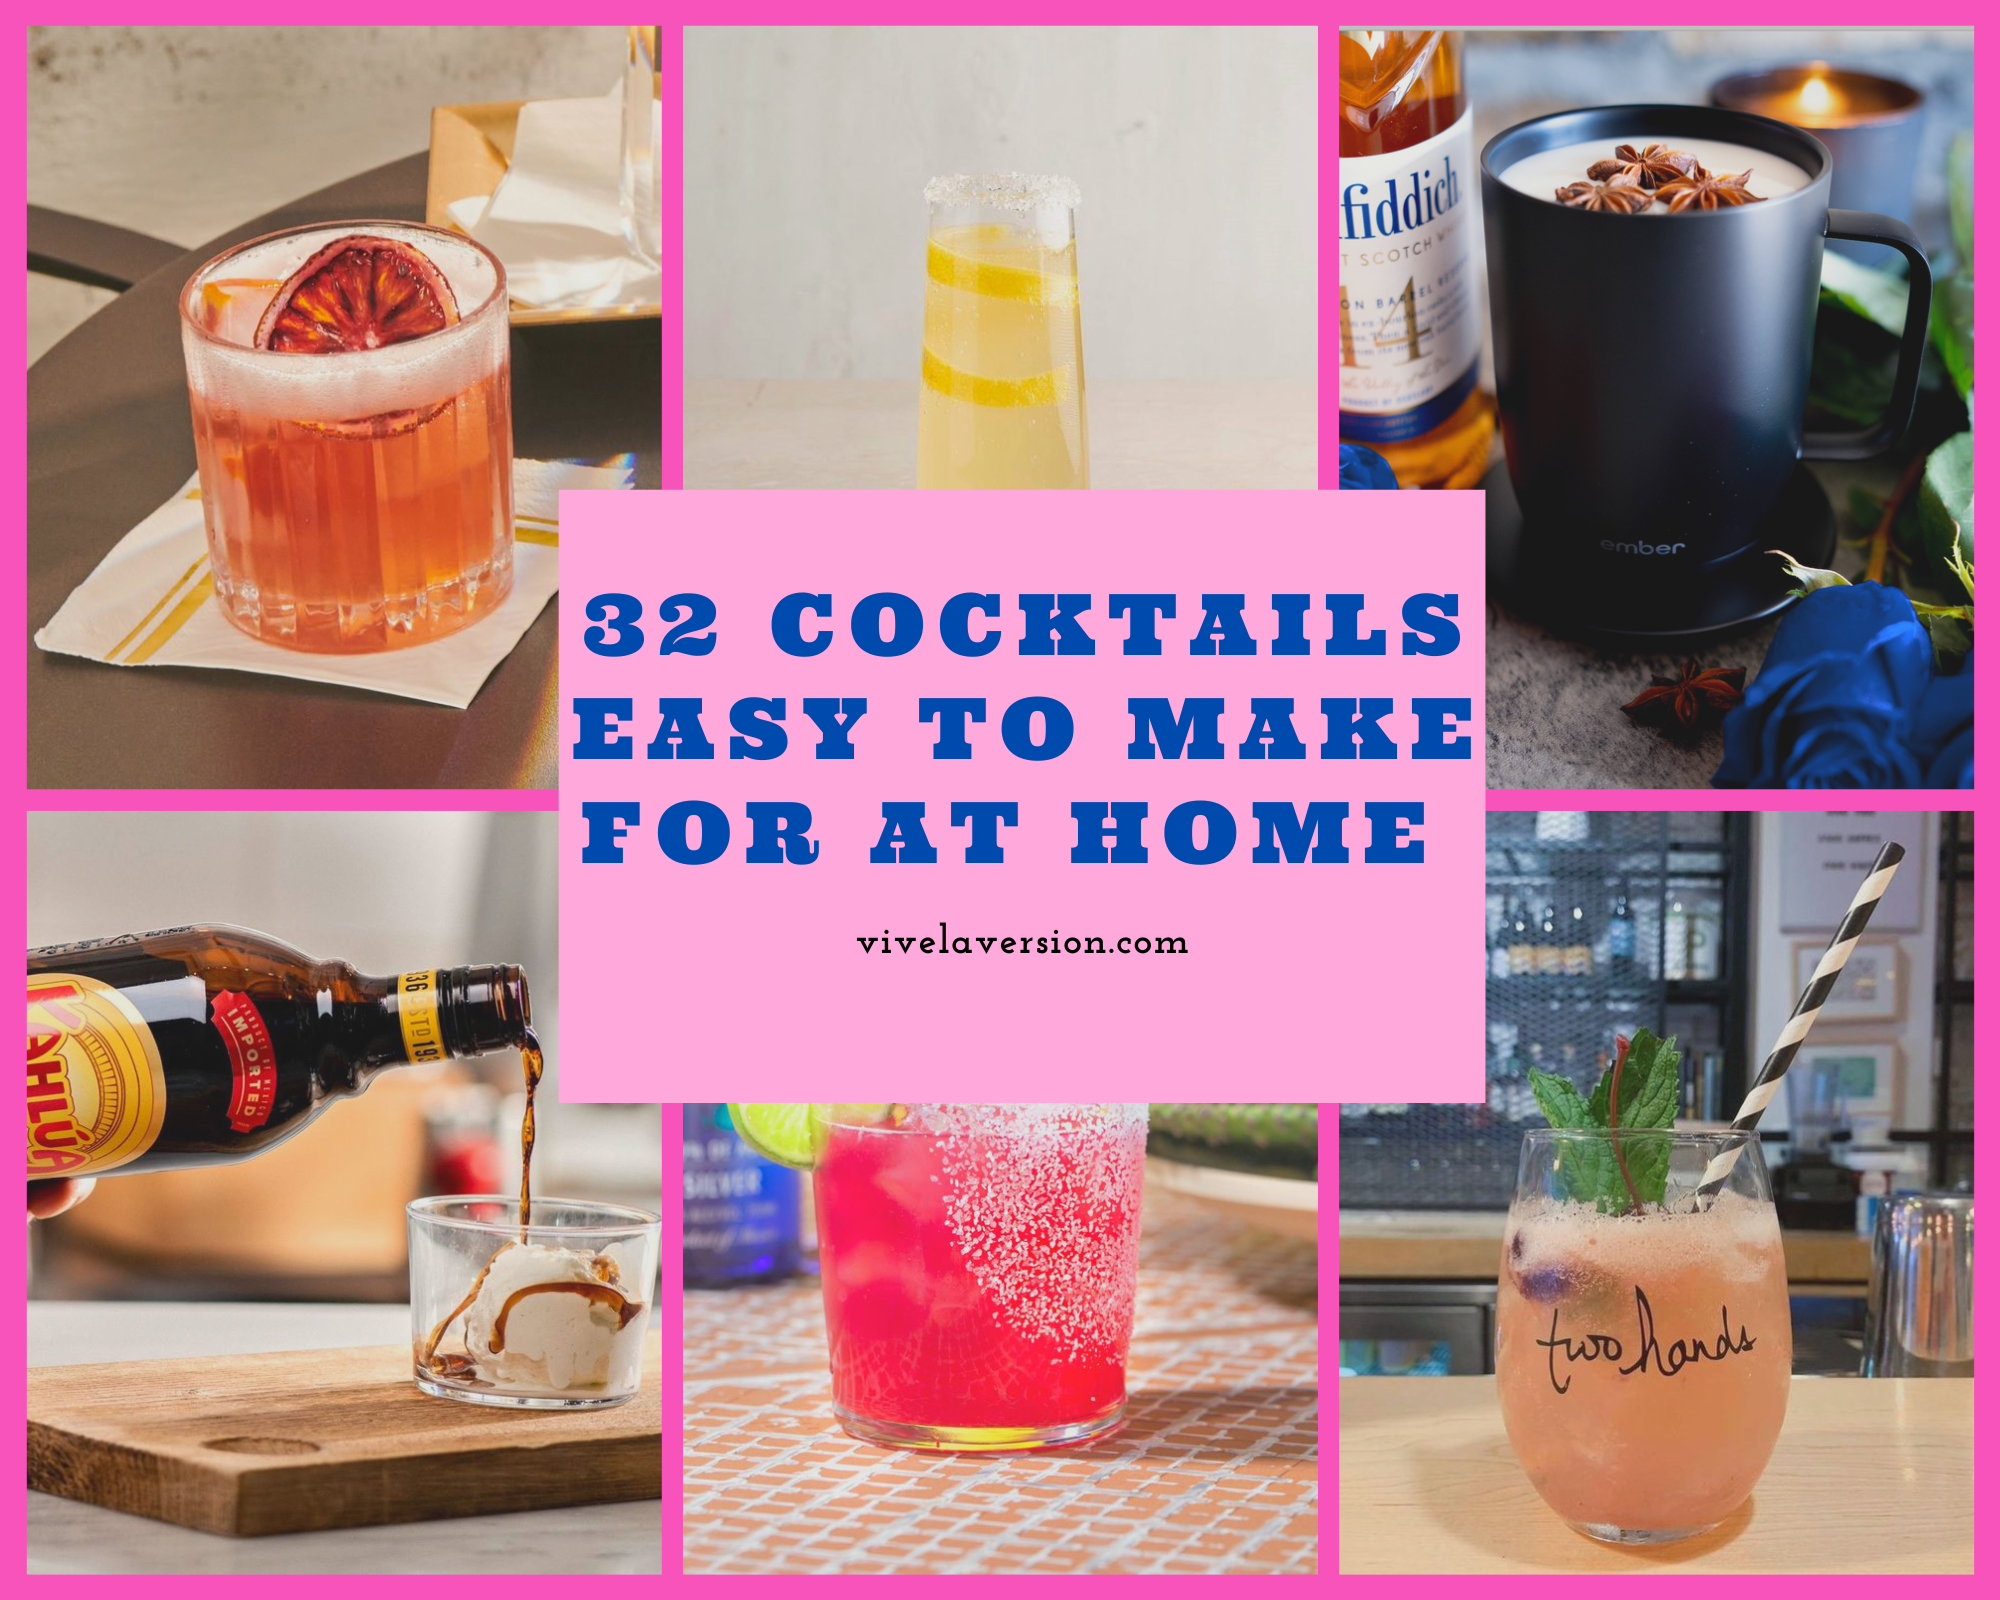 32 Cocktails easy to make for at Home